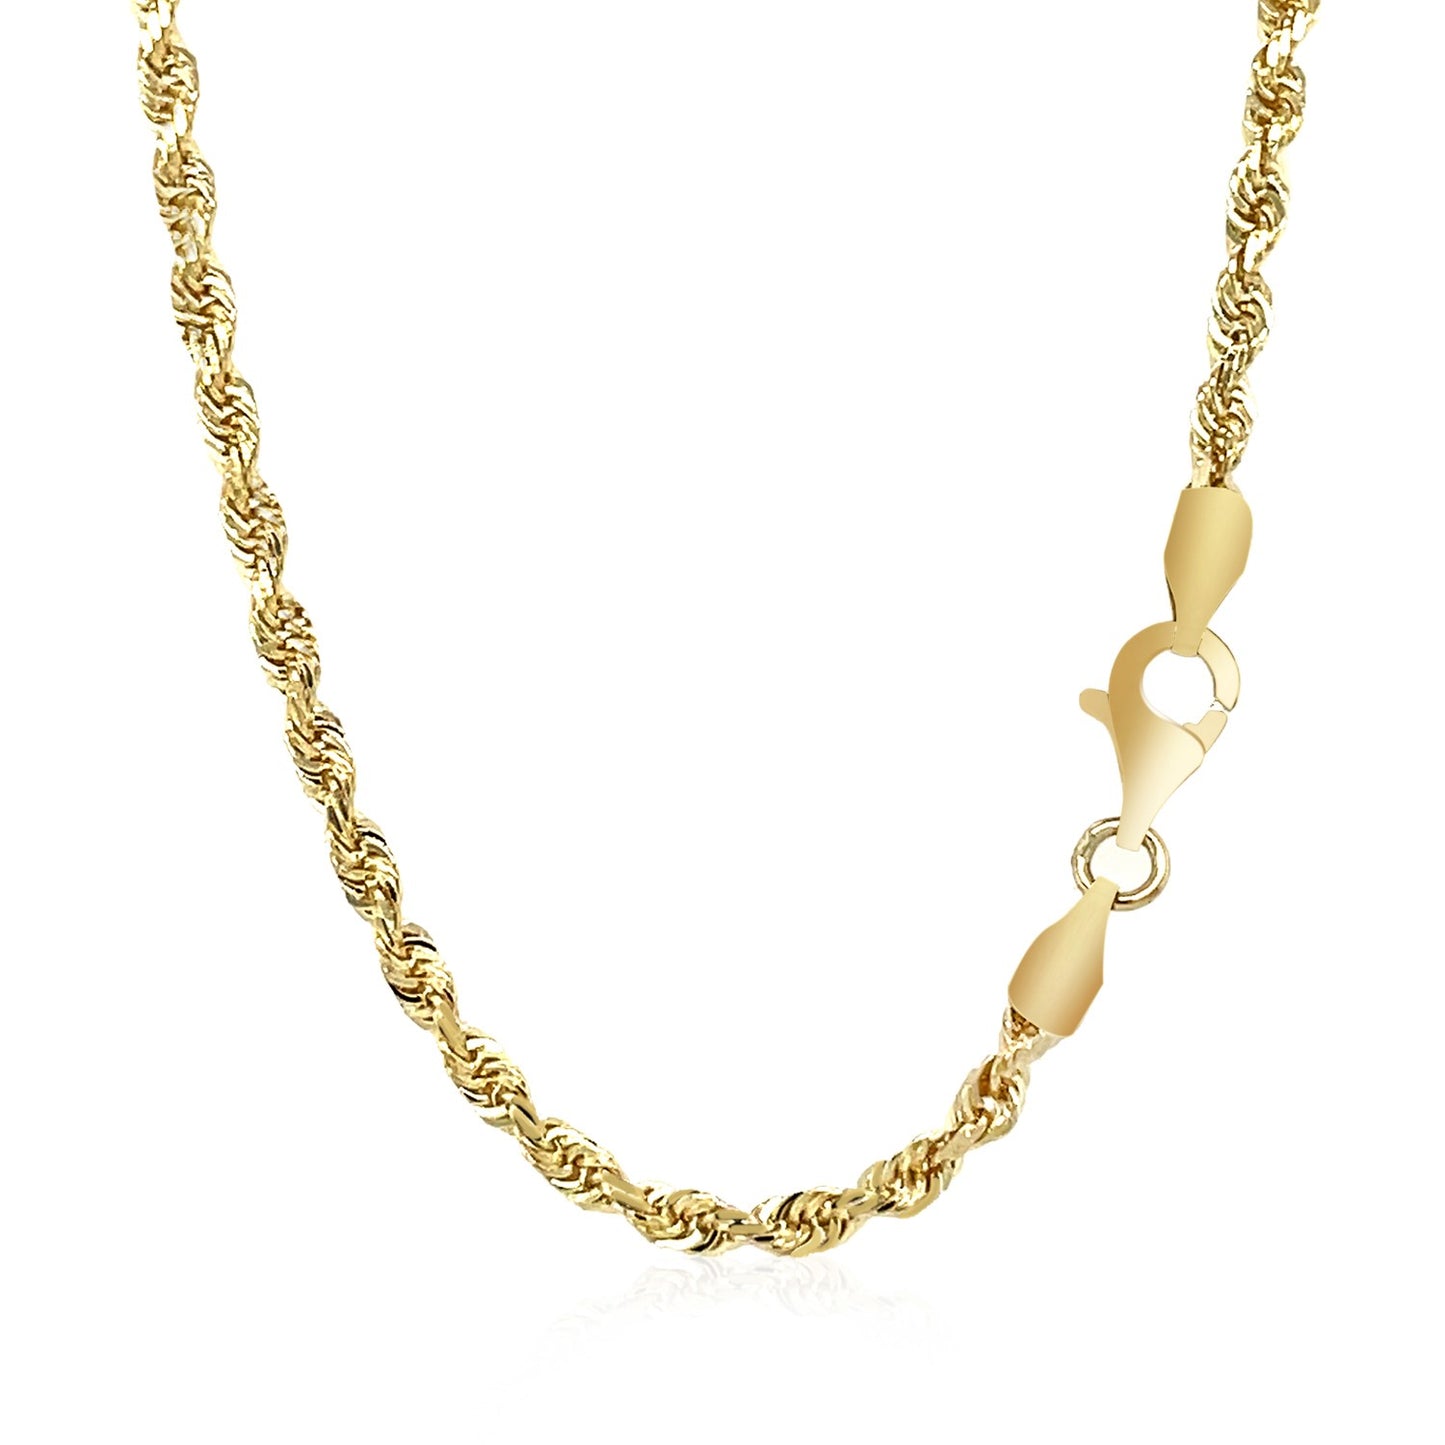 2.75mm 14k Yellow Gold Solid Diamond Cut Rope Chain